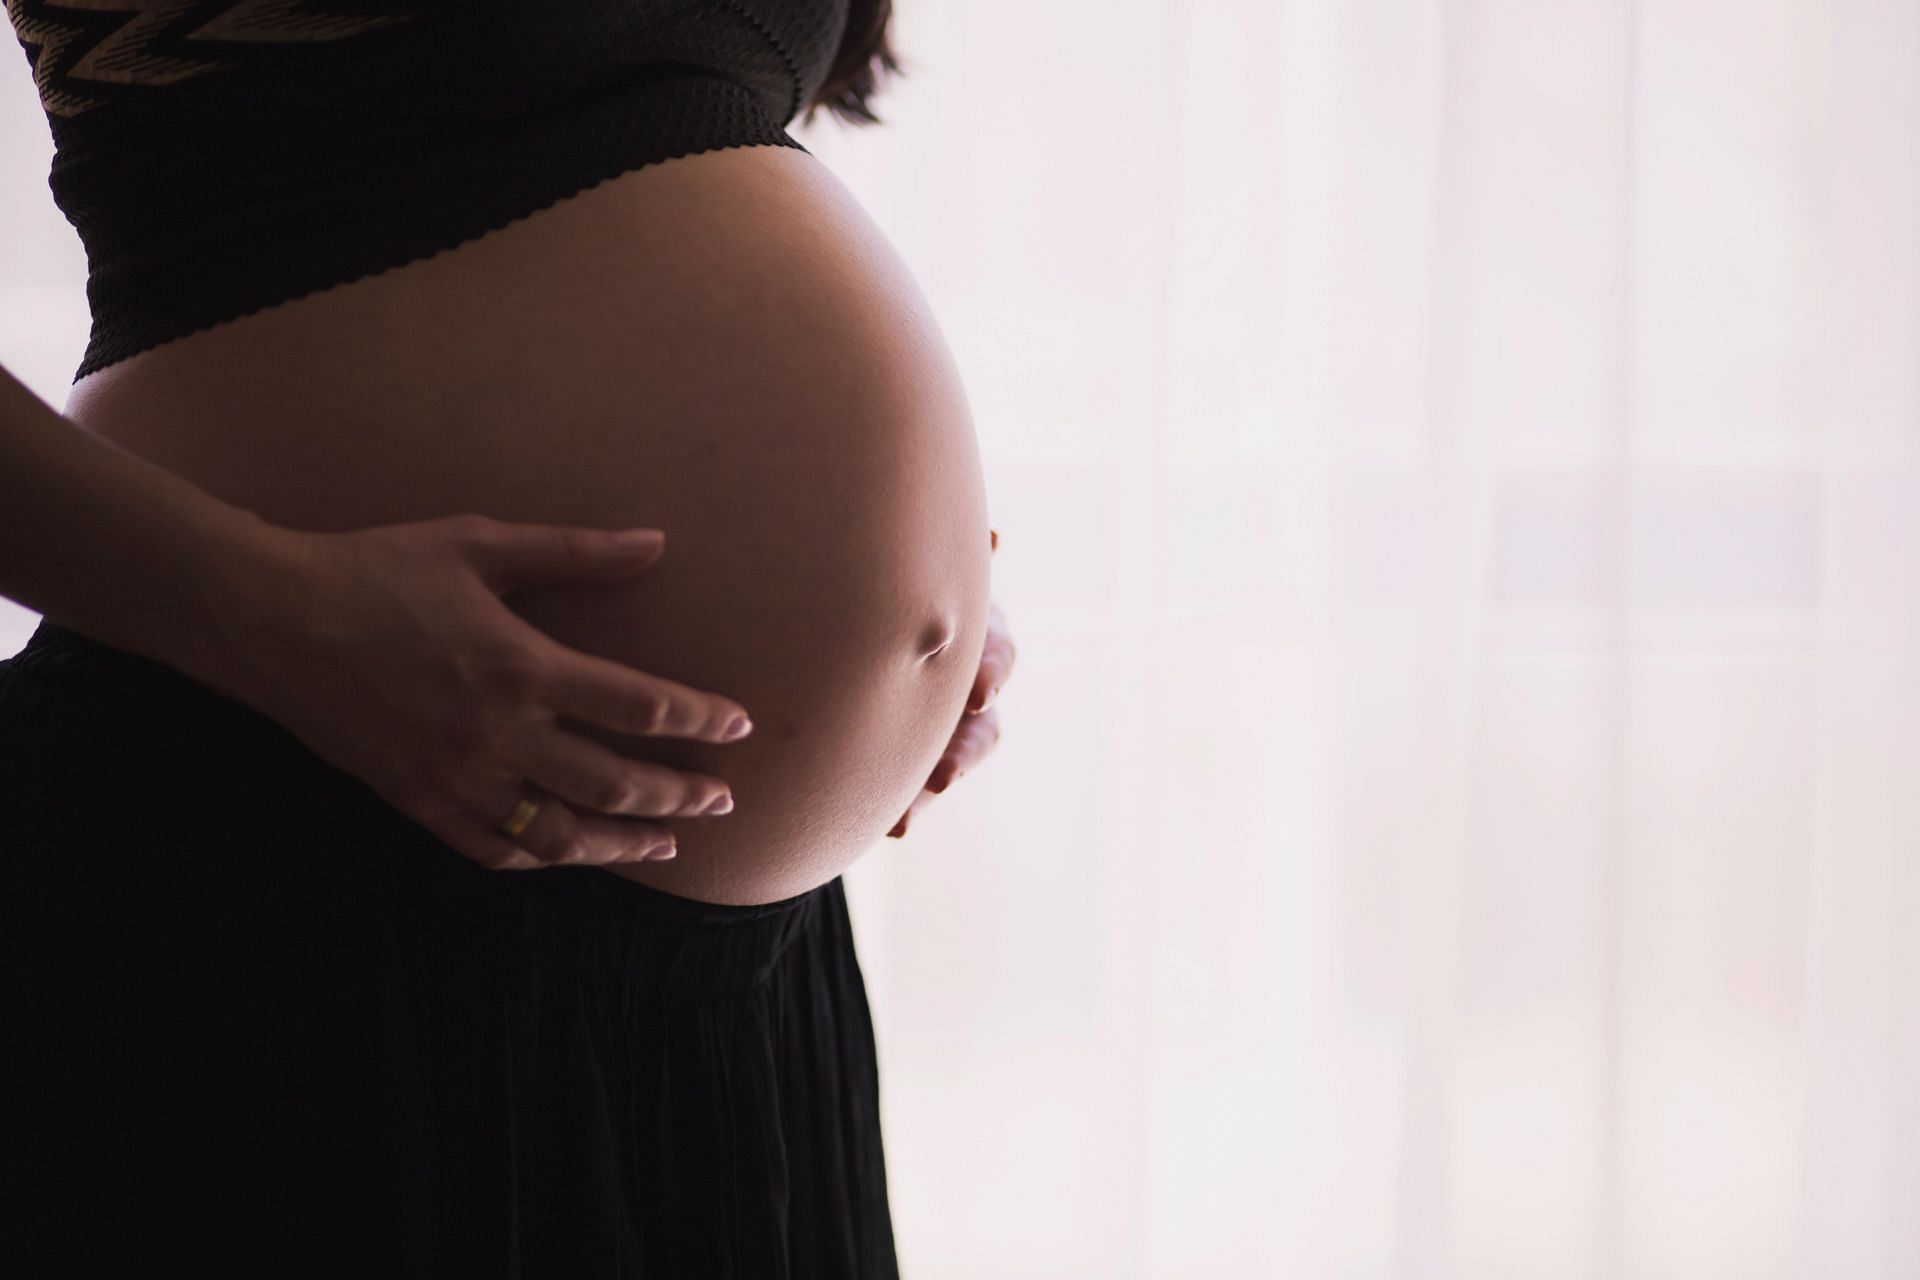 Safe and simple exercises can be performed during pregnancy. (Image via Pexels/Freestocksorg)